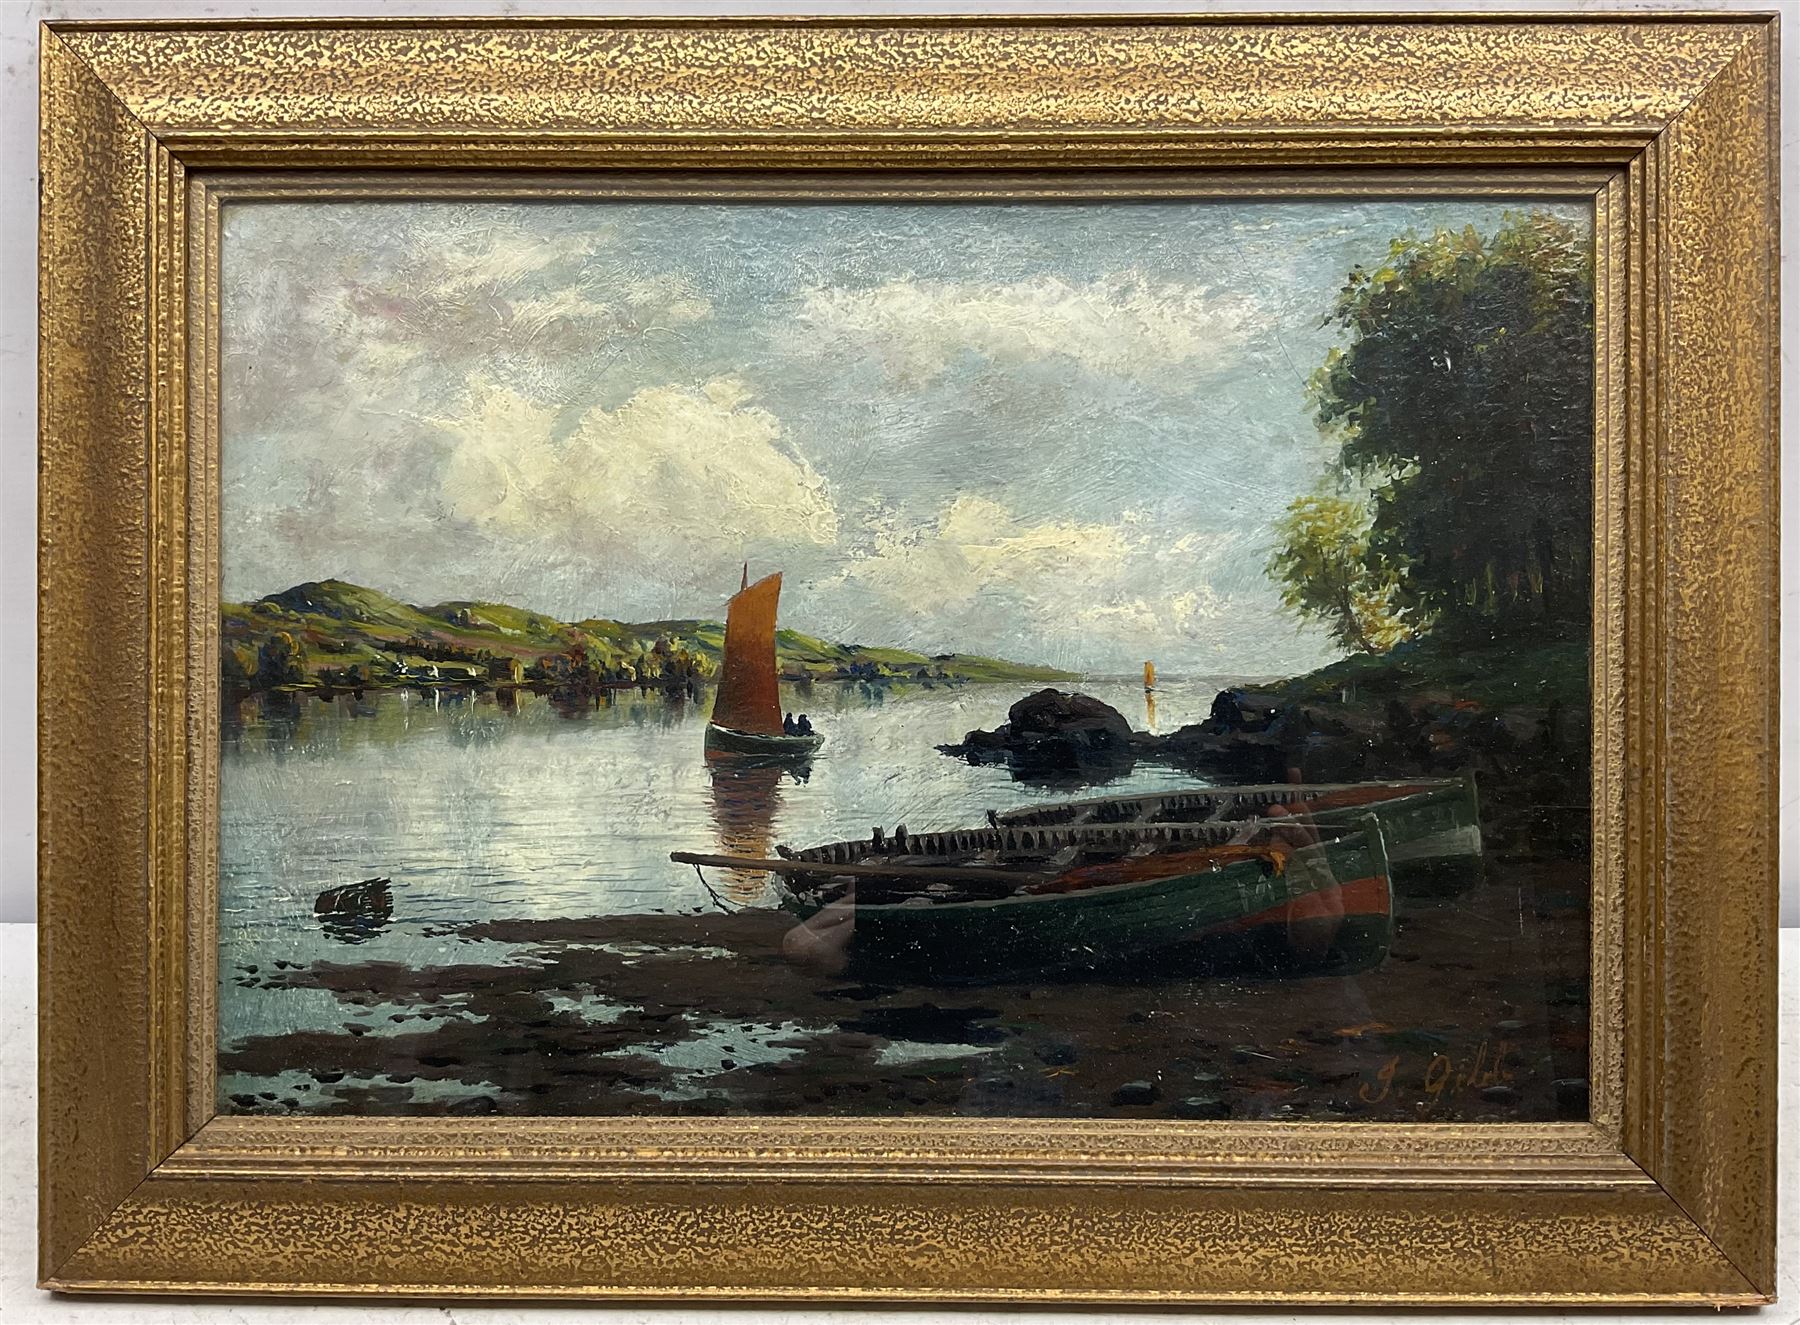 J Gibb (19th century): Montrose Fishing Boats in an Estuary - Image 2 of 3